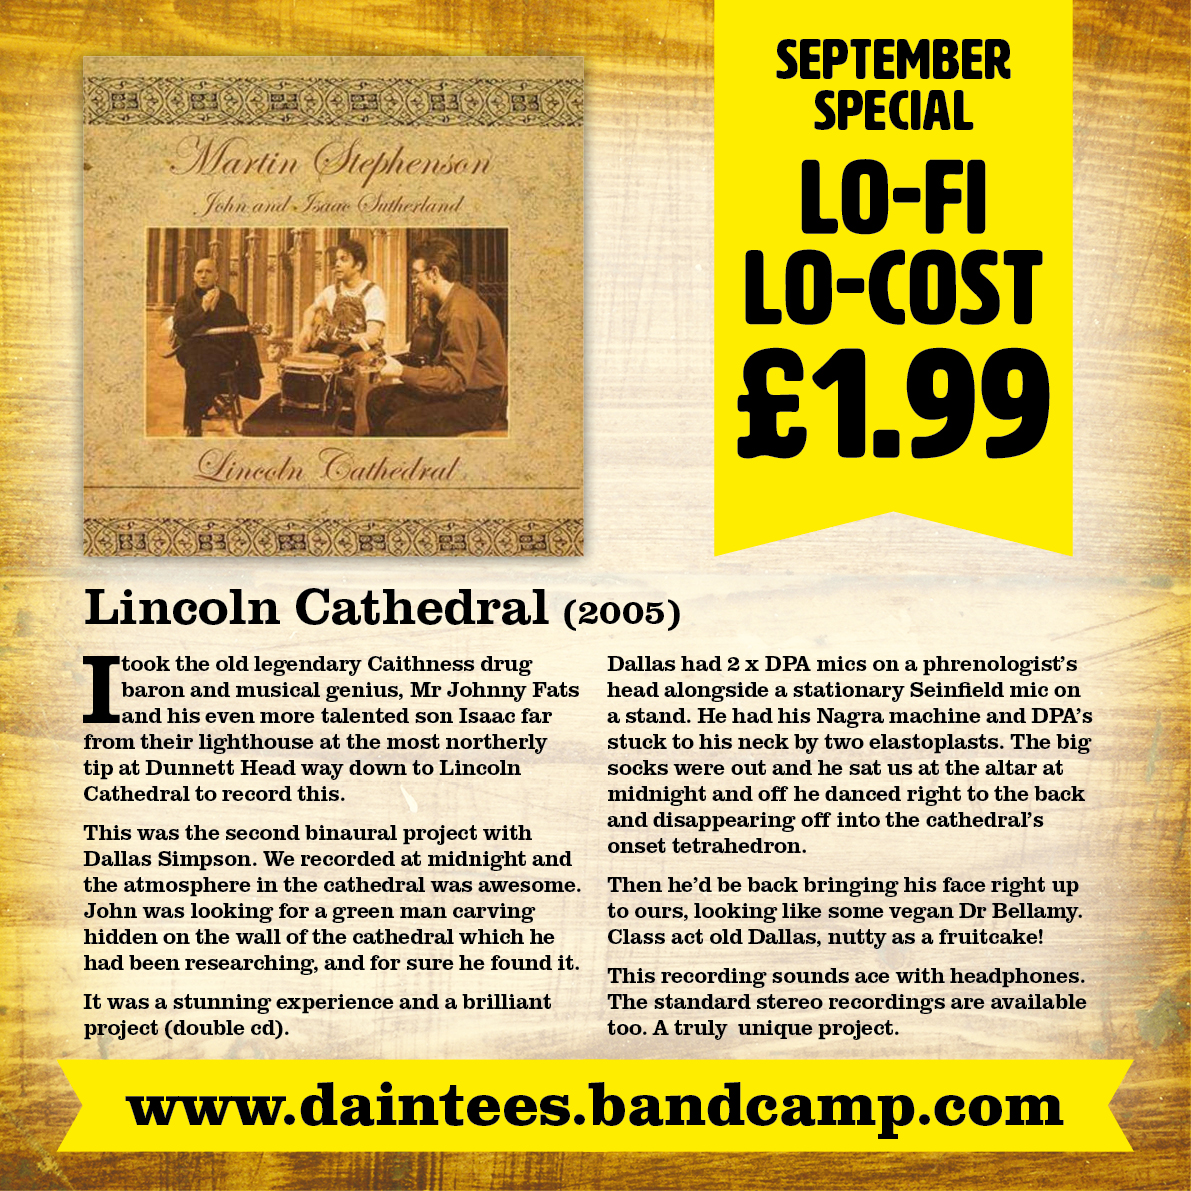 "Lincoln Cathedral" (2005)Here's a few thoughts on Lincoln Cathedral, the second album from "The Binaural Collection" in the £1.99 "Lo-Fi / Lo-Cost" promotion. Enjoy! Mx http://daintees.bandcamp.com 